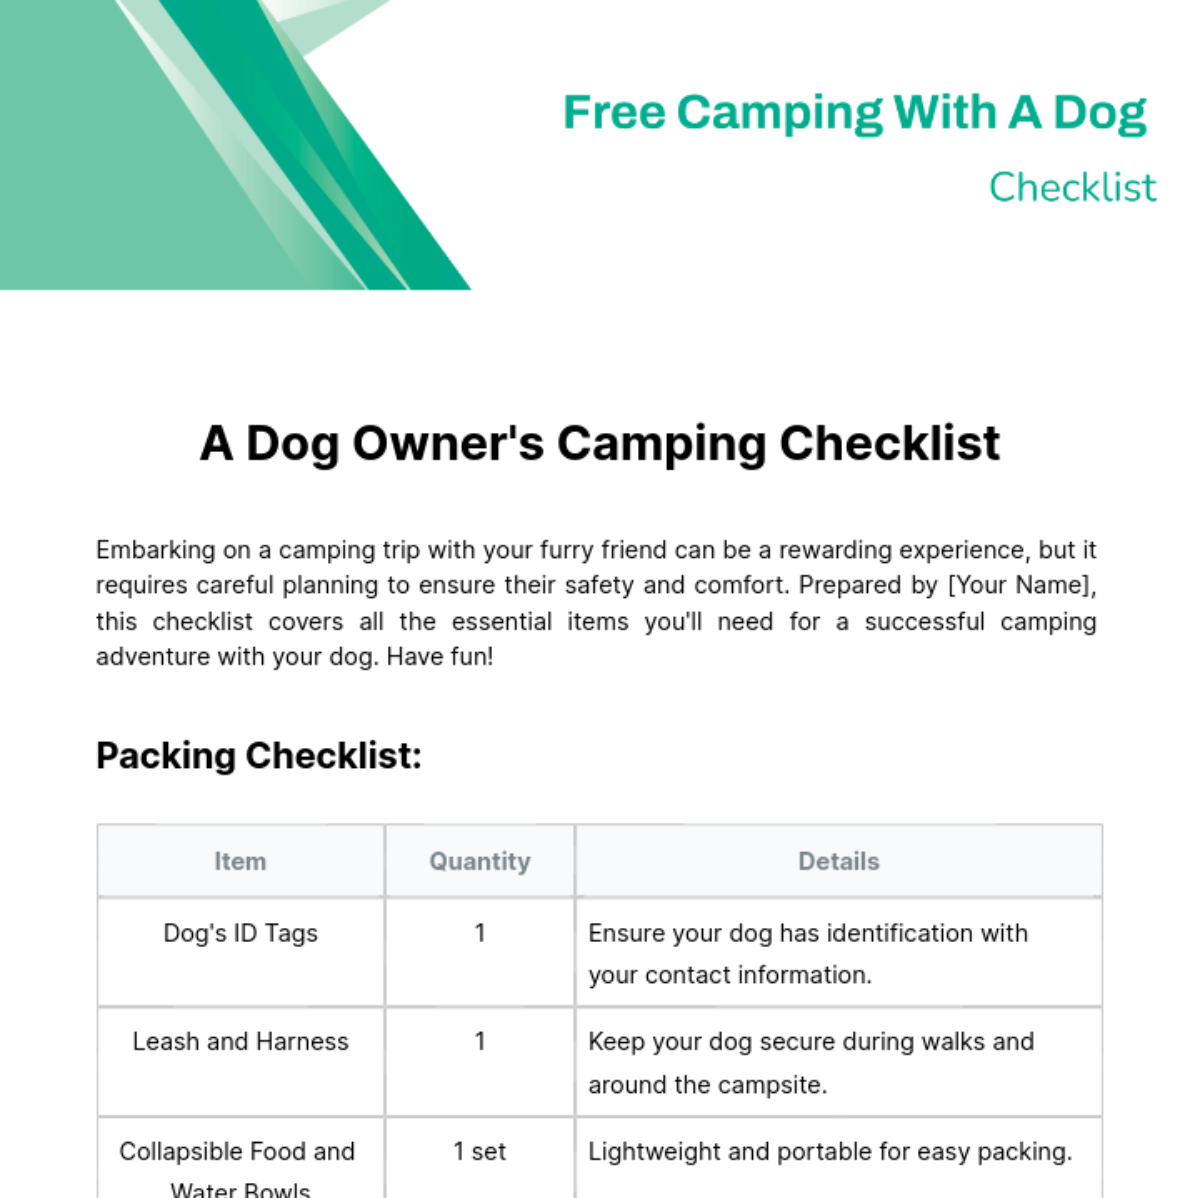 Free Camping With A Dog Checklist Template